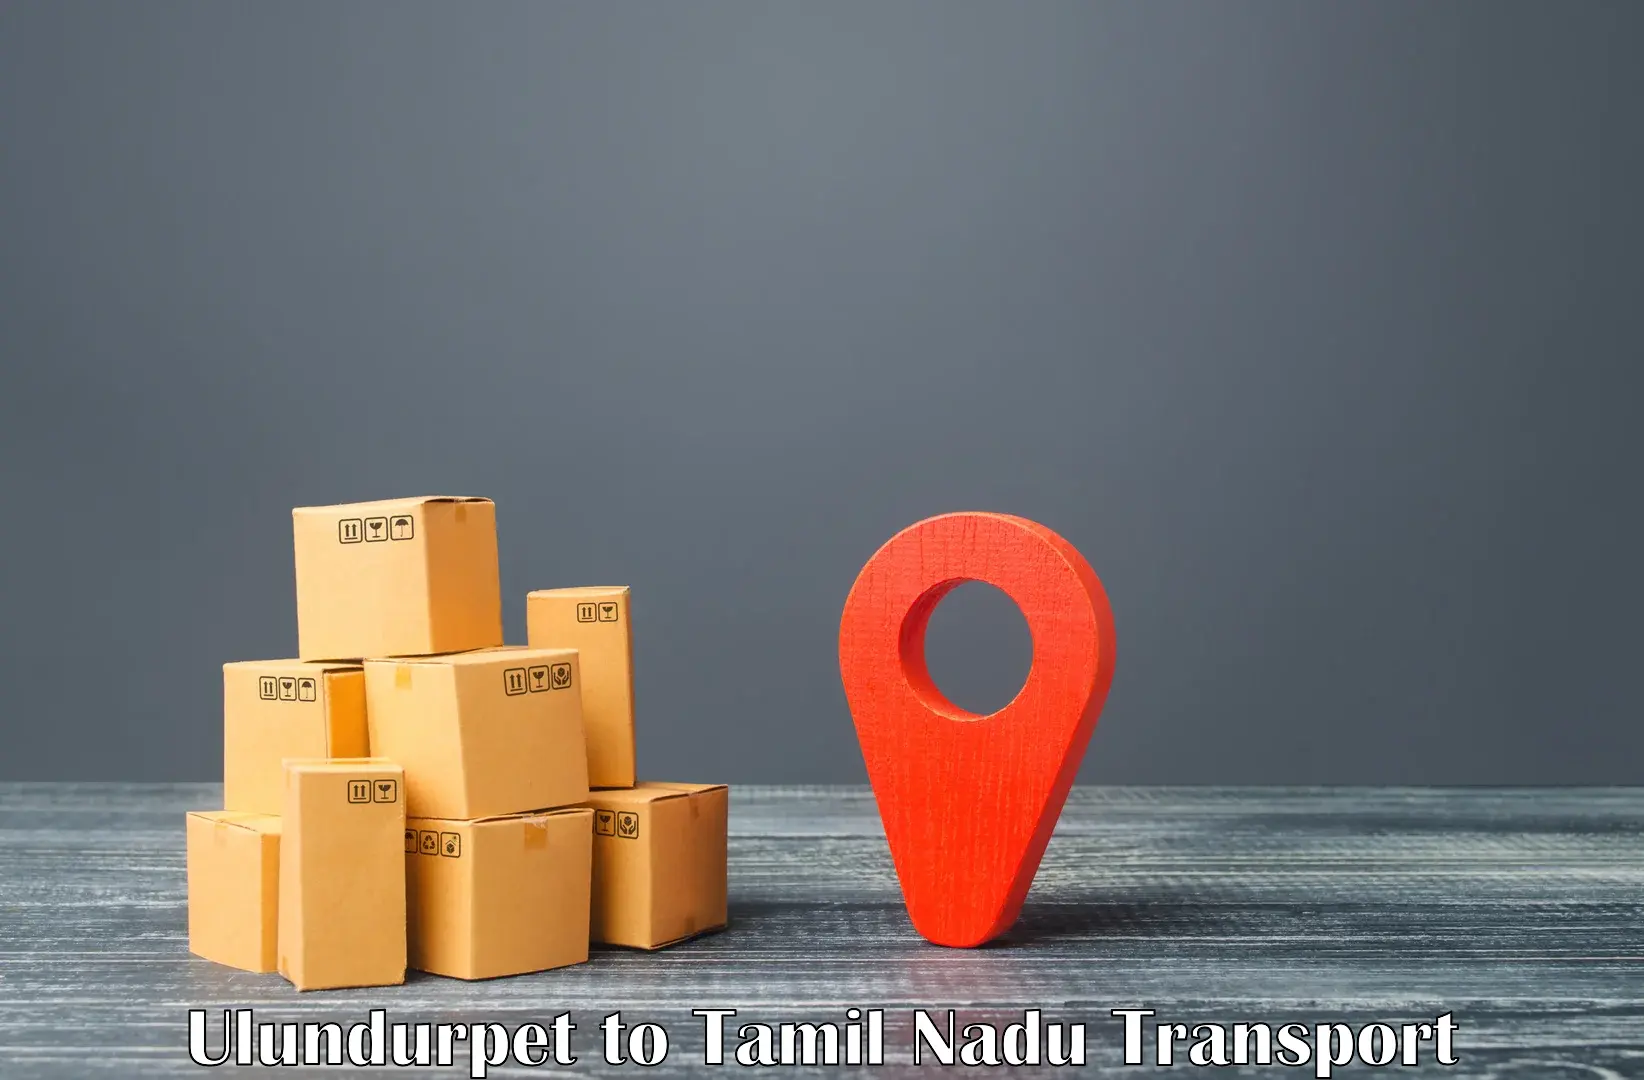 Road transport online services Ulundurpet to Ennore Port Chennai